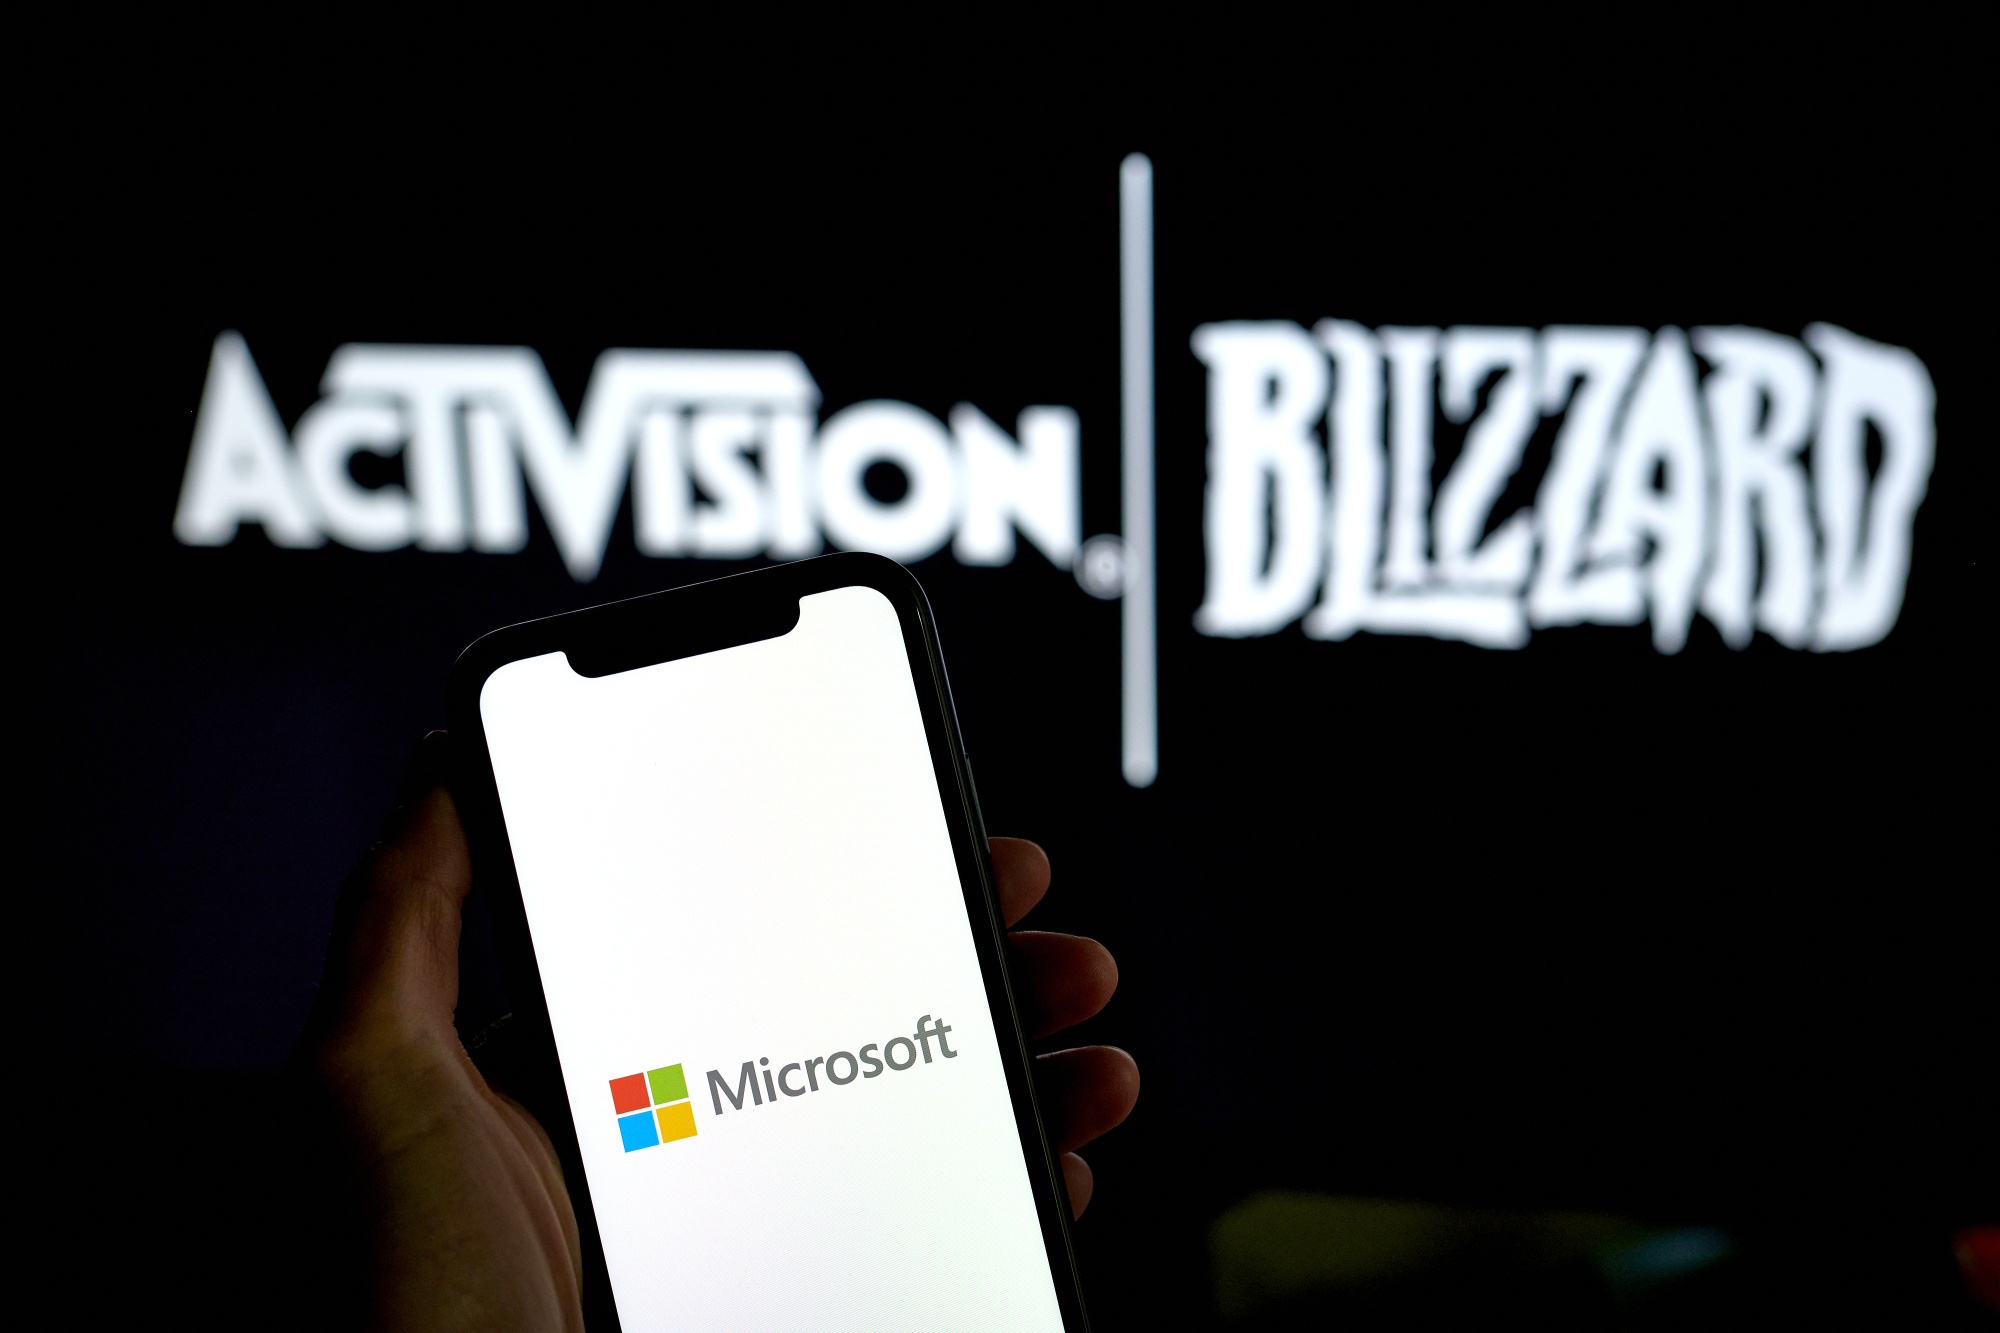 Microsoft Buys Activision Blizzard In A Bid To Compete In The